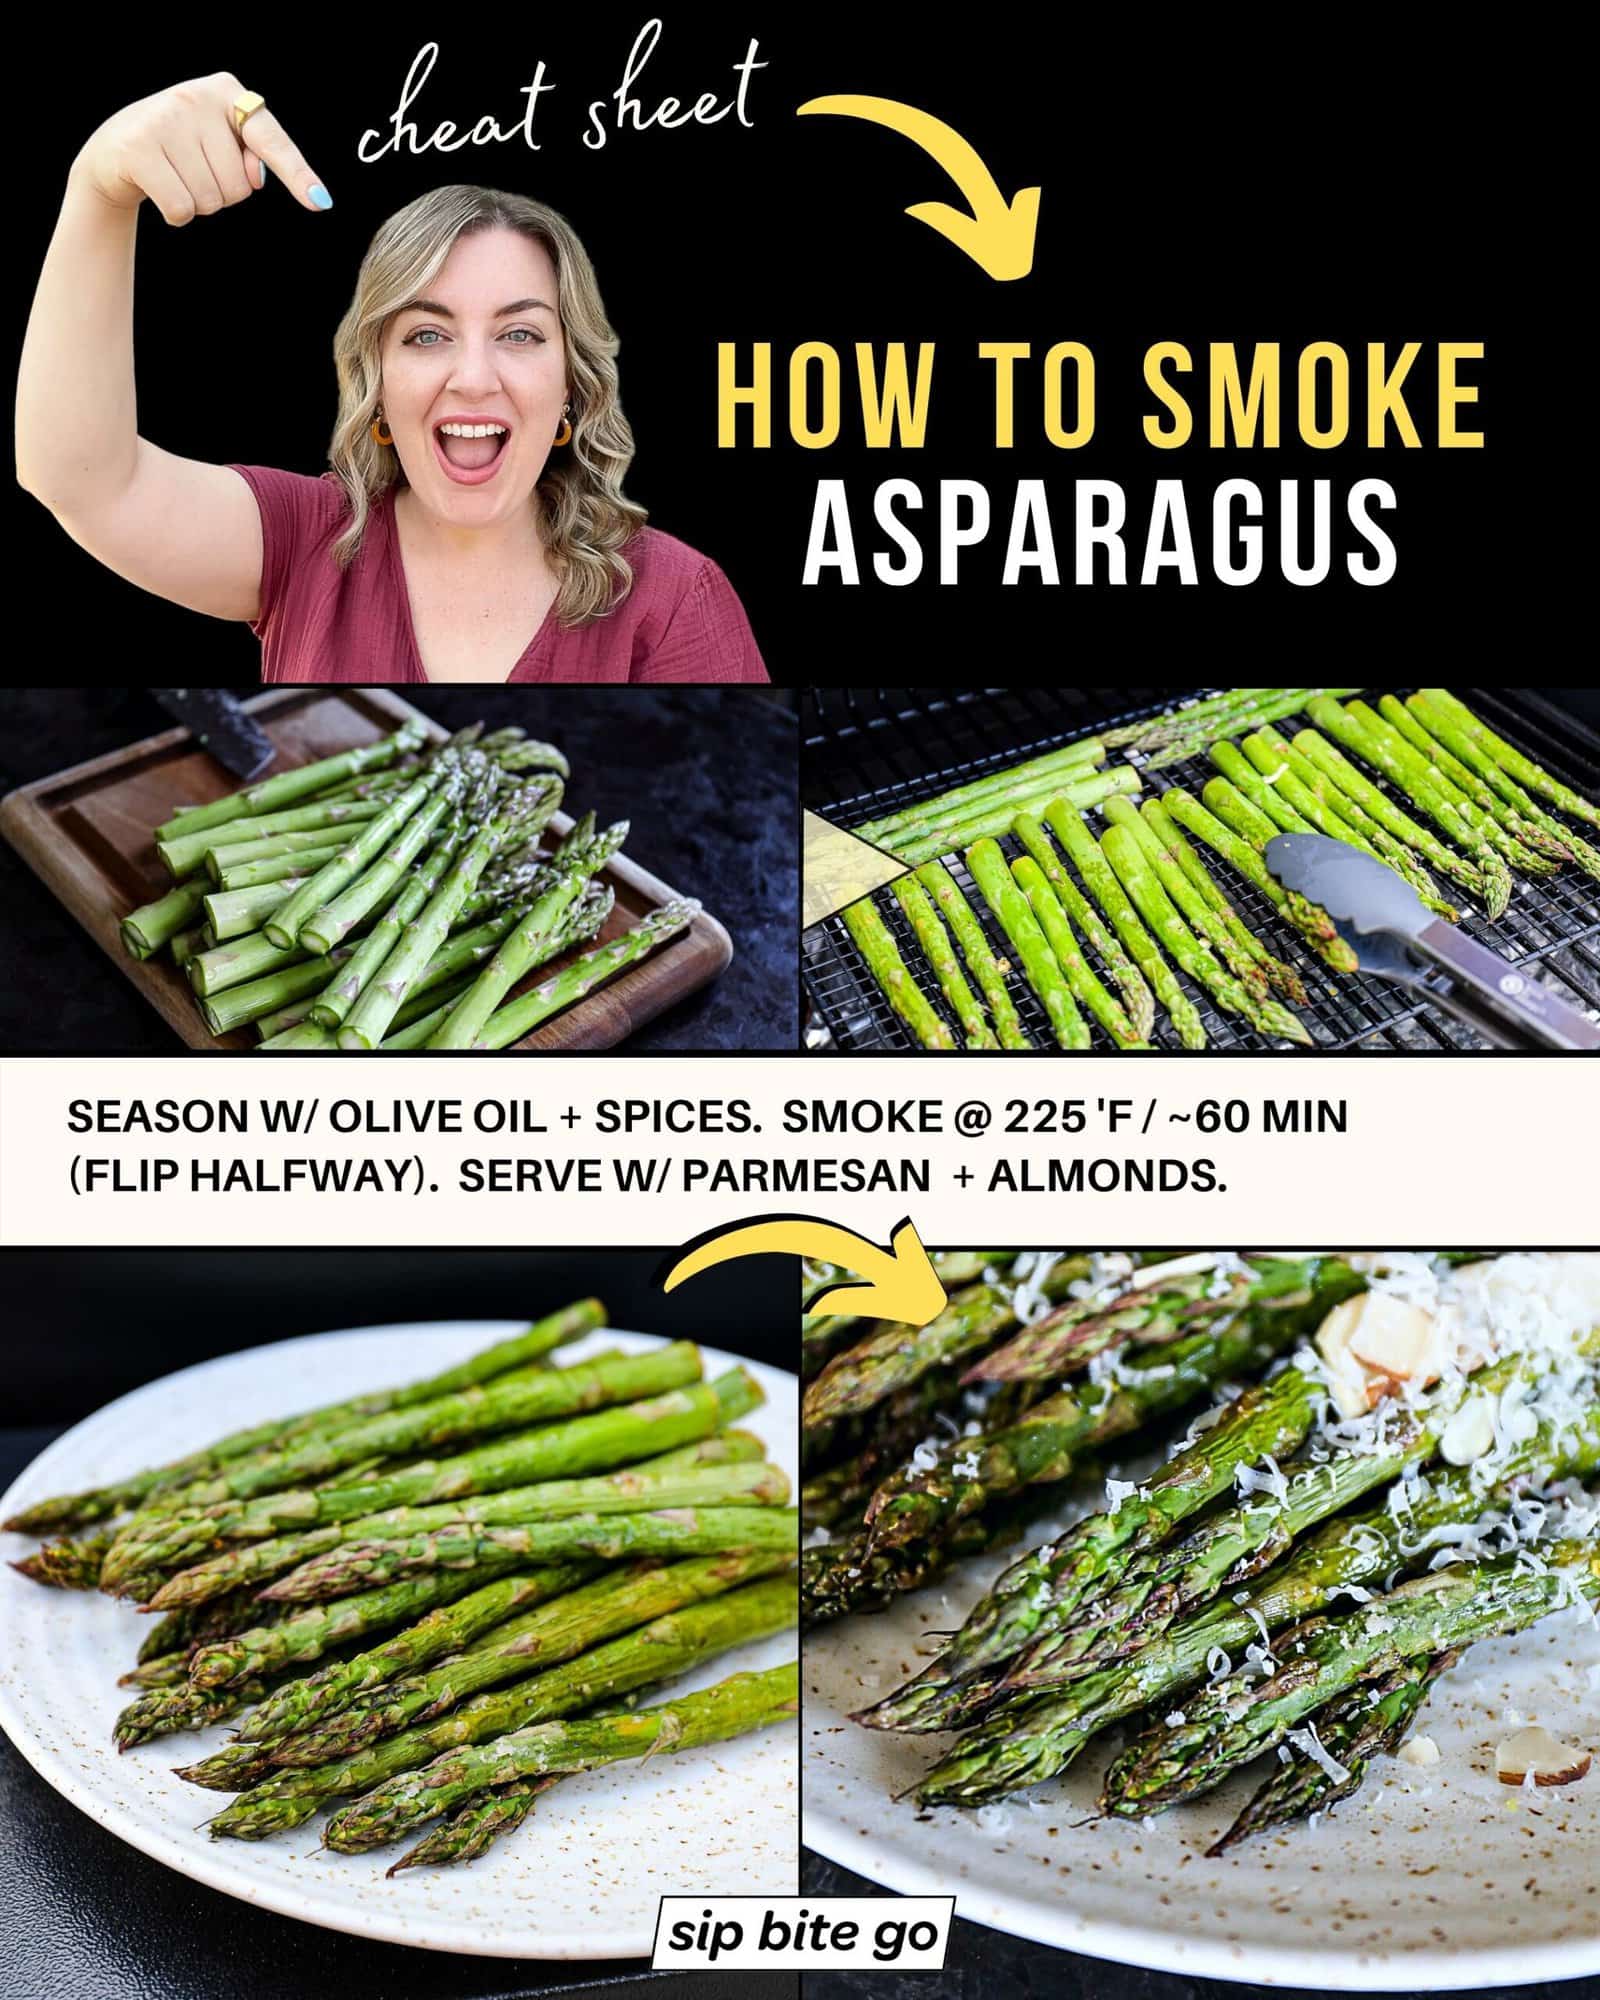 Infographic with smoker recipe steps and captions demonstrating how to smoke asparagus on Traeger pellet grills